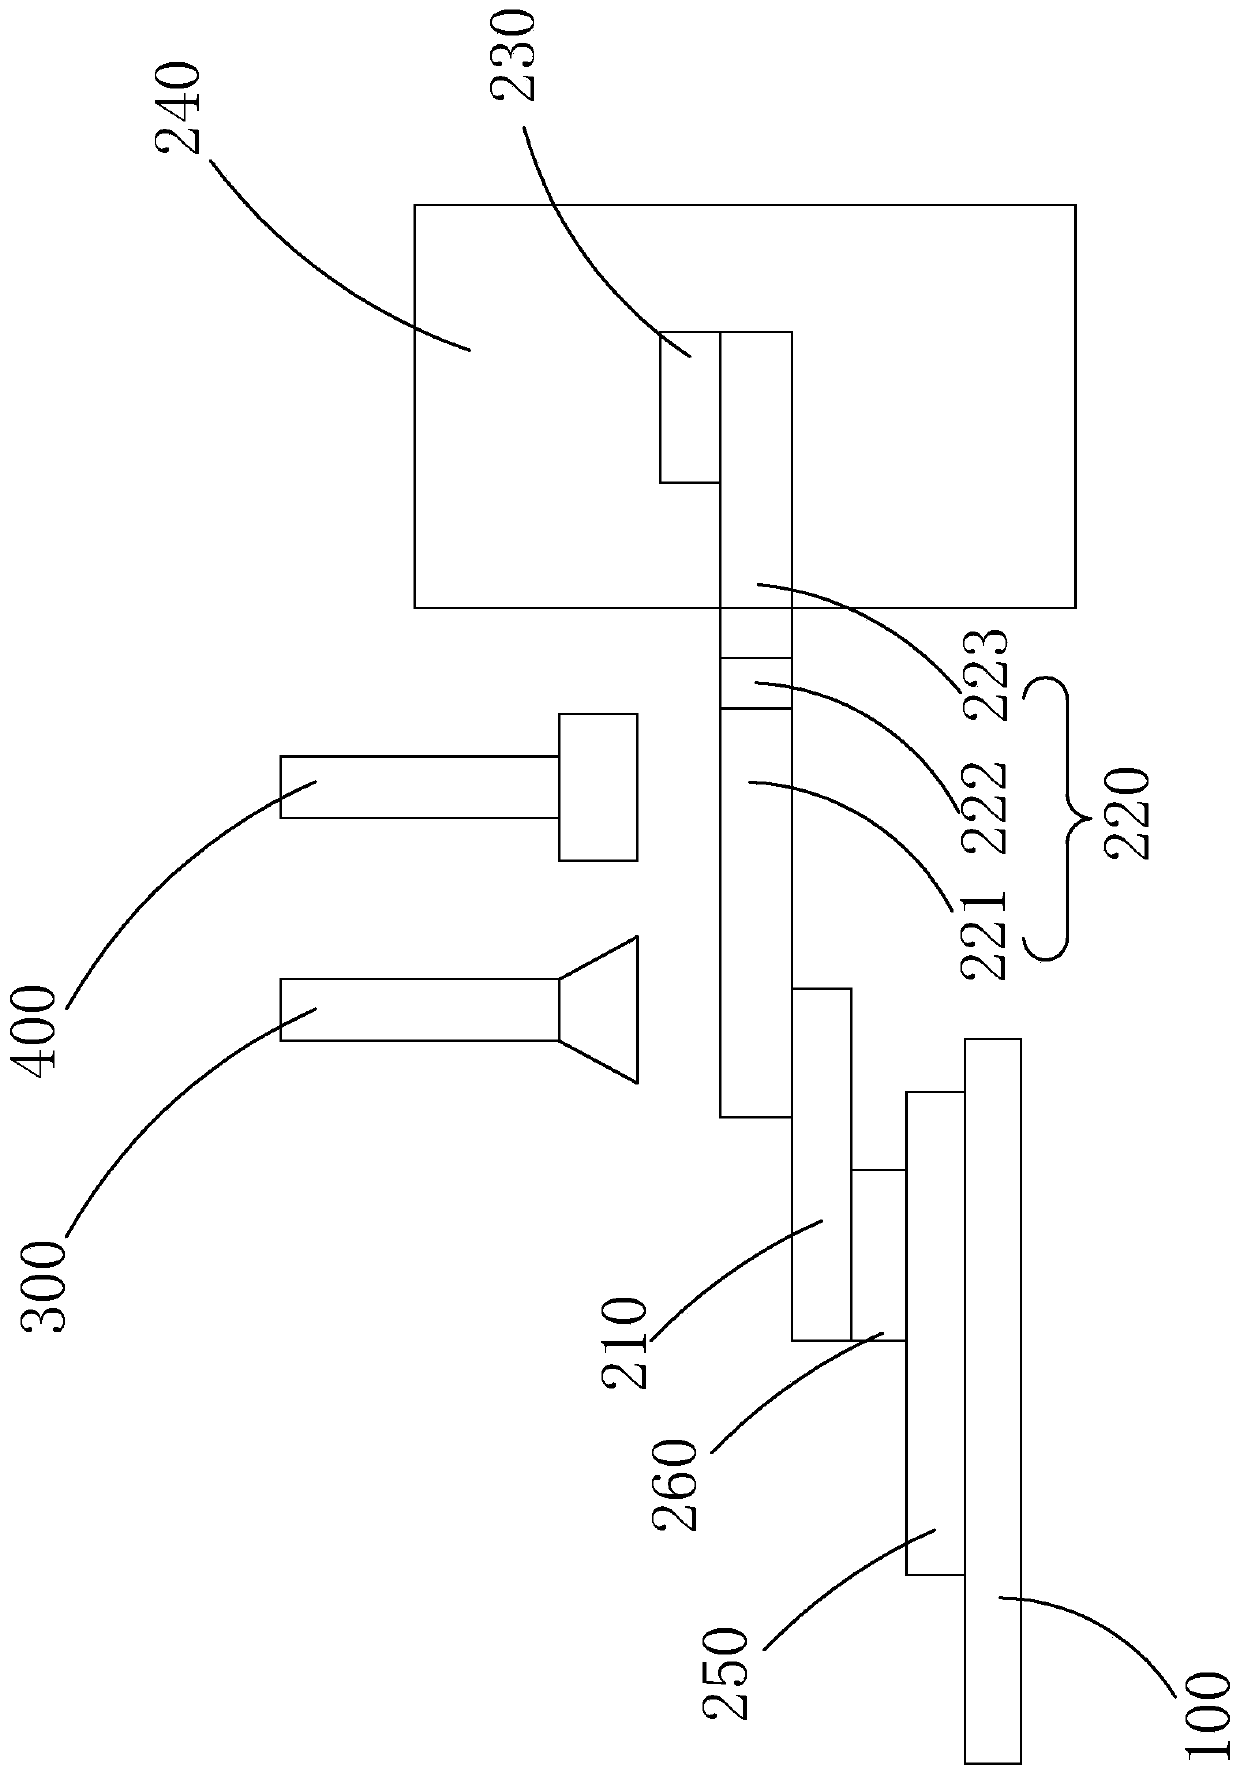 Raw coal ash detection device and method